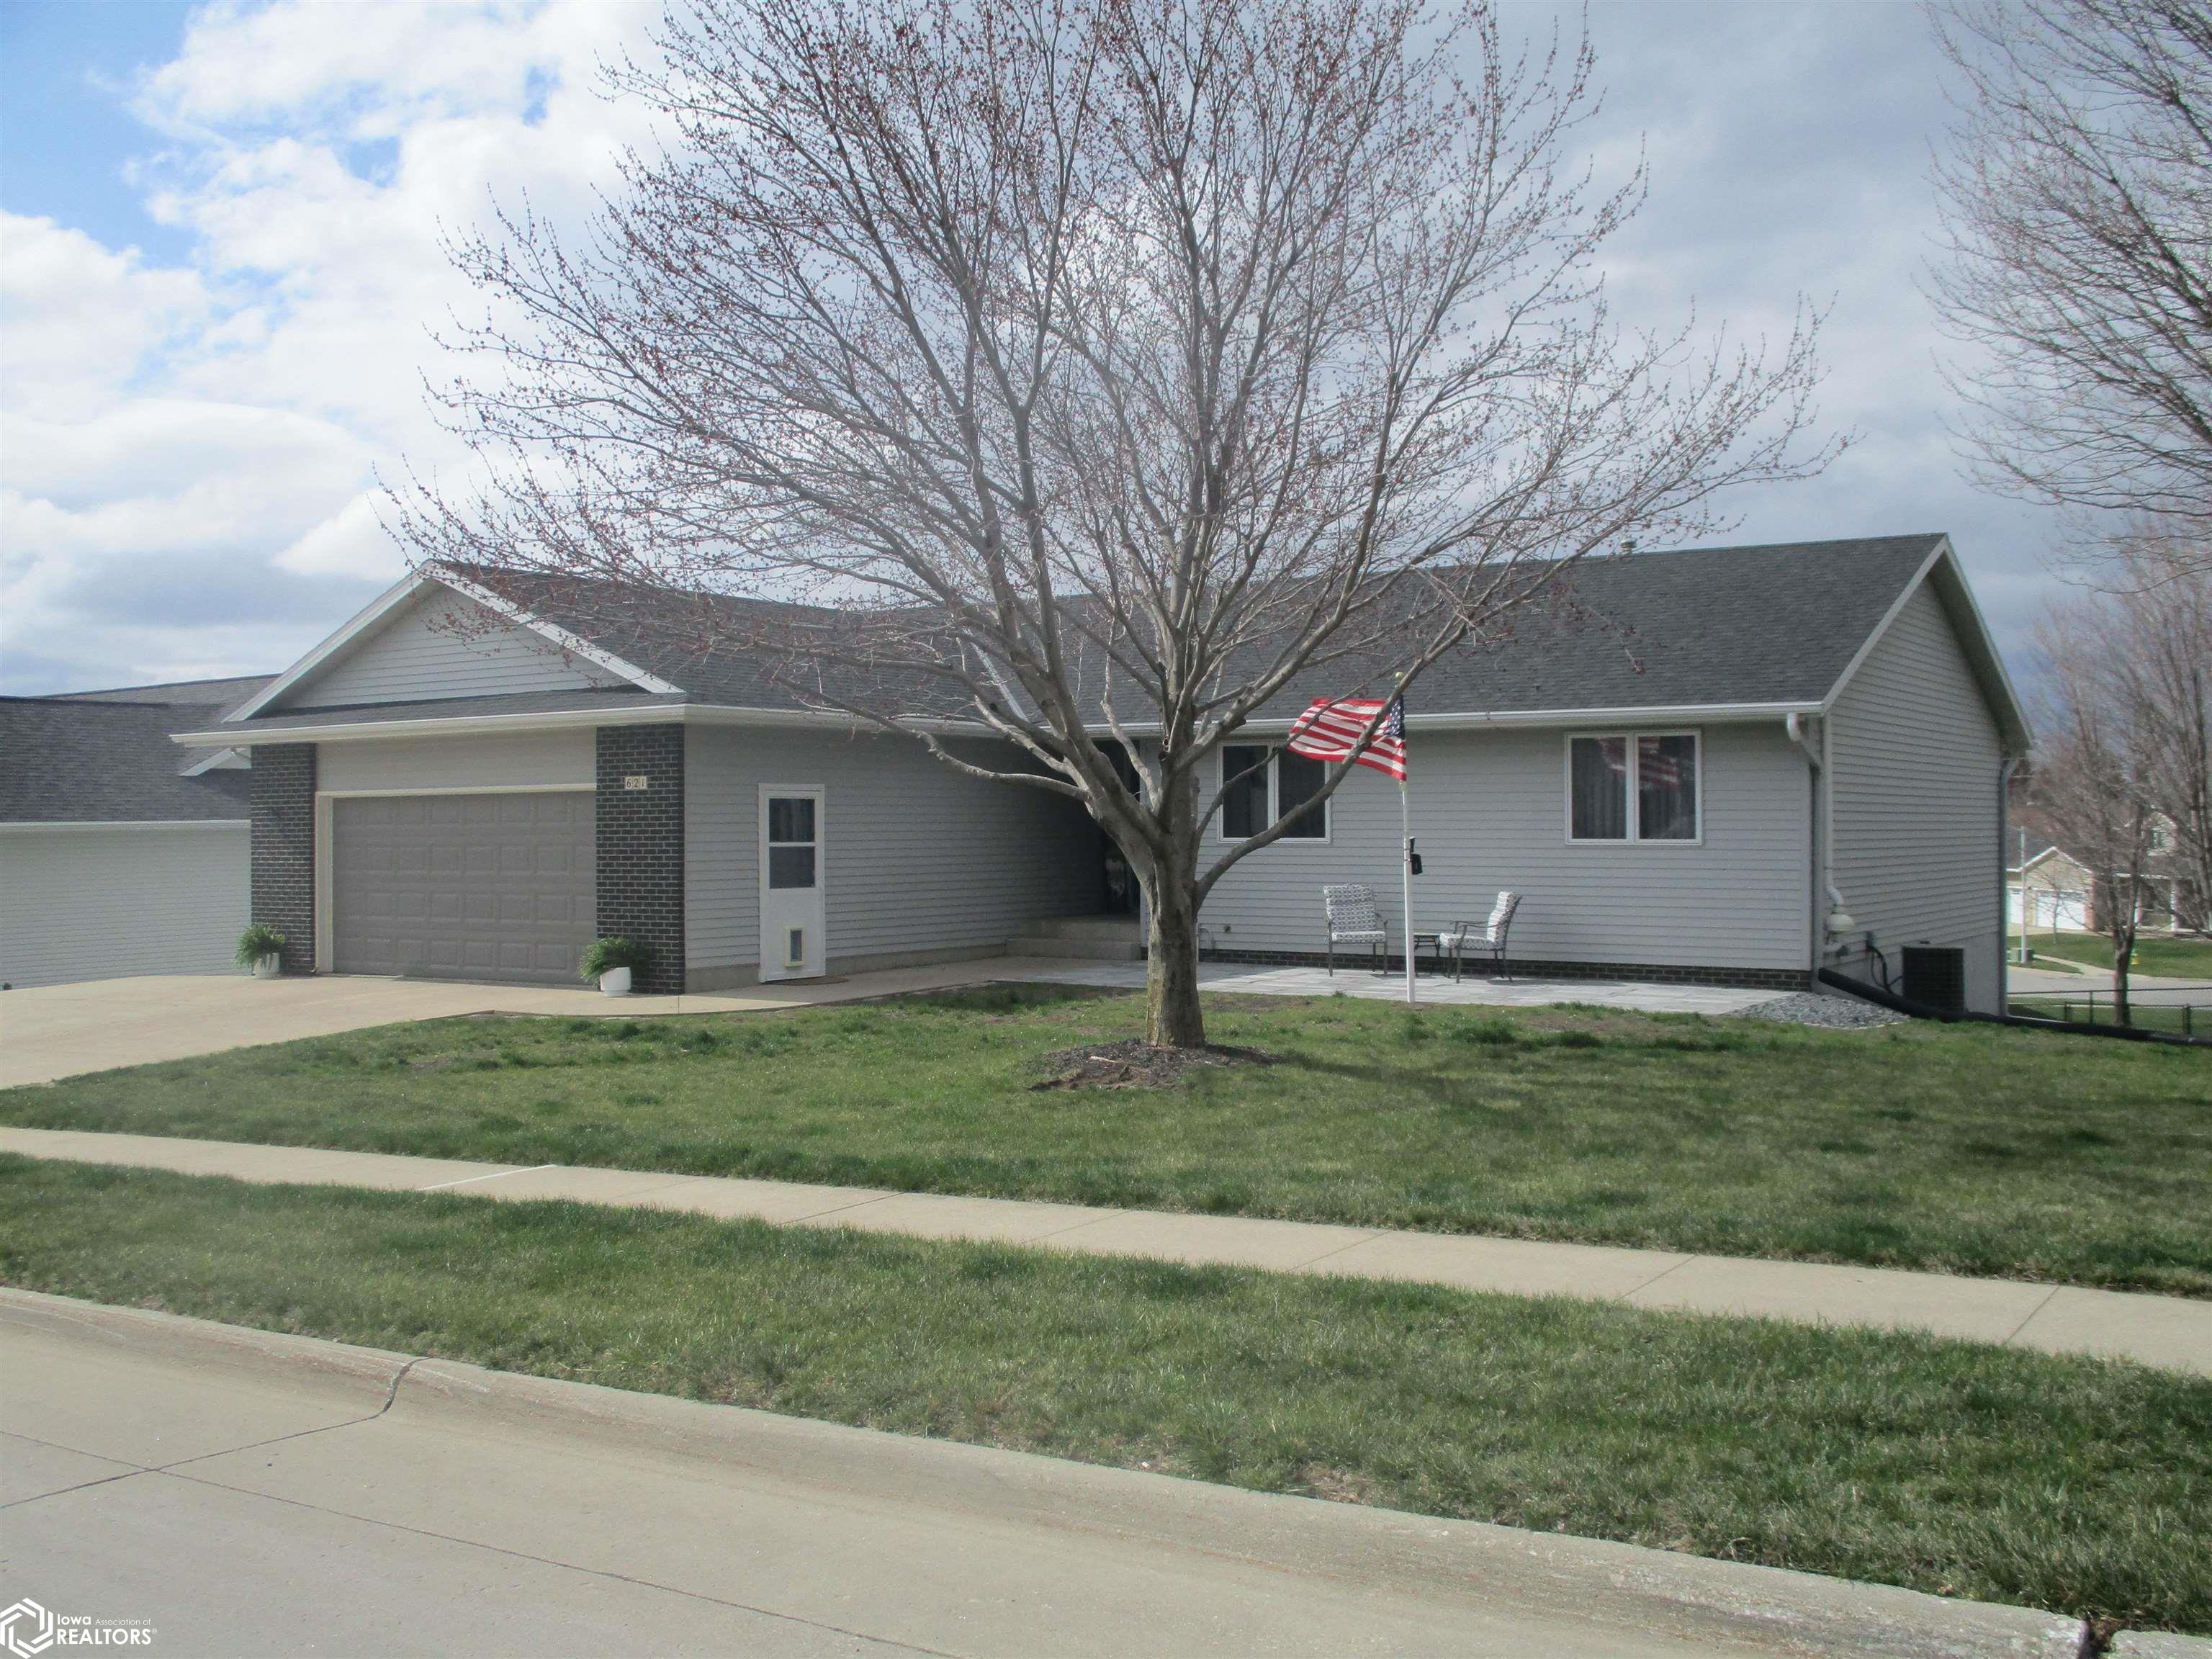 621 SOUTHGATE RD, Carroll, Iowa 51401, 5 Bedrooms Bedrooms, ,2 BathroomsBathrooms,Single Family,For Sale,SOUTHGATE RD,6316329